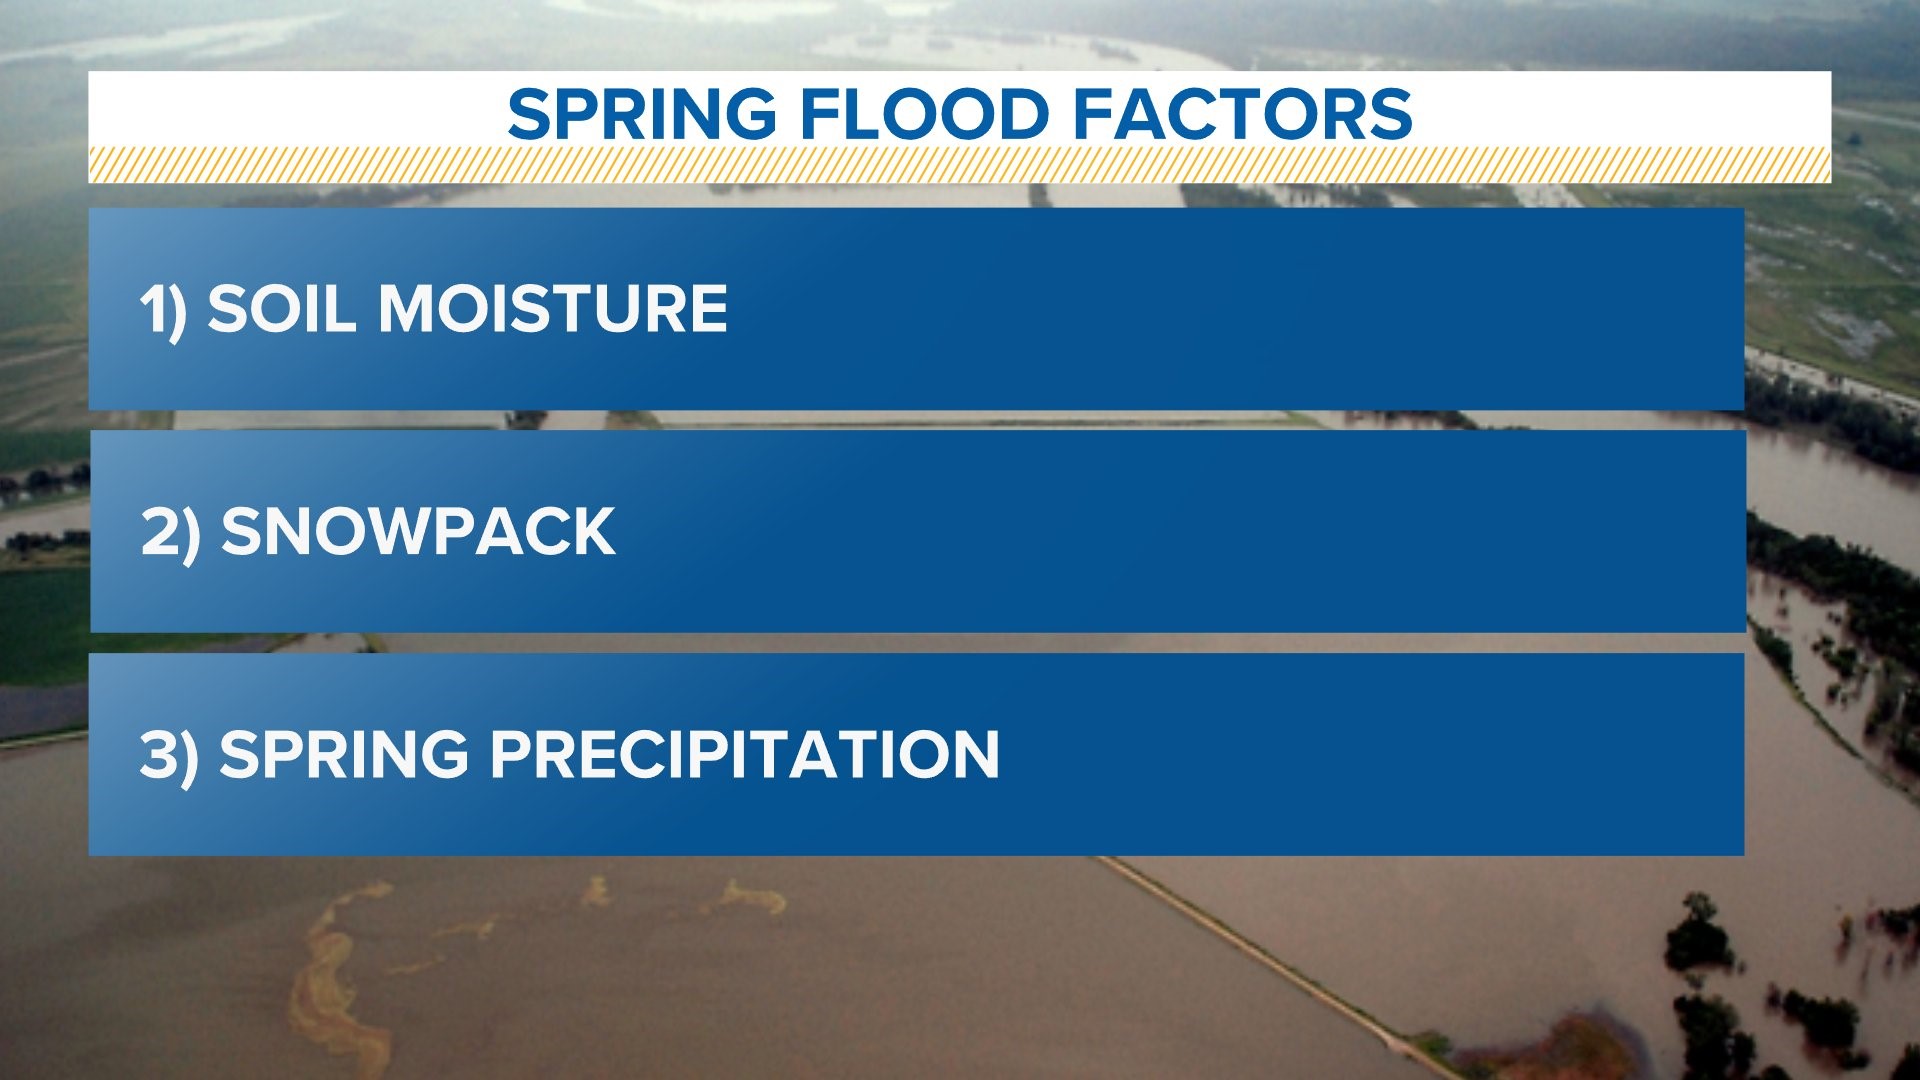 Spring flooding is affected by soil moisture, snowpack, and spring precipitation.